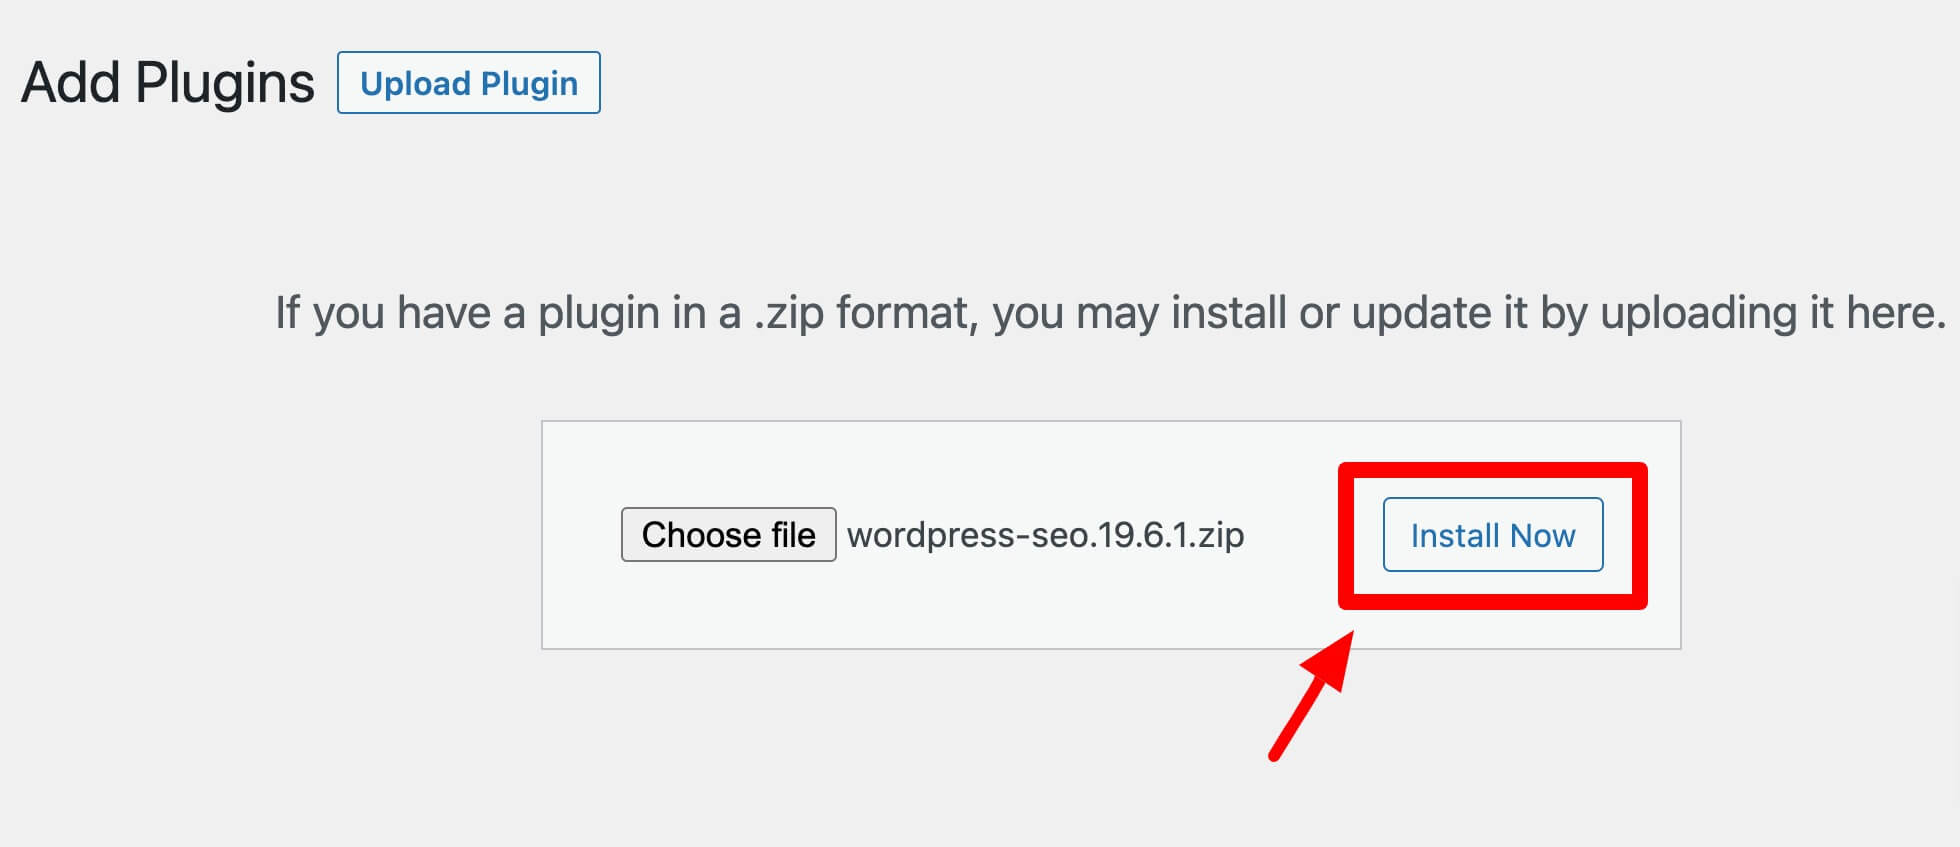 Click on Install Now button to install the plugin